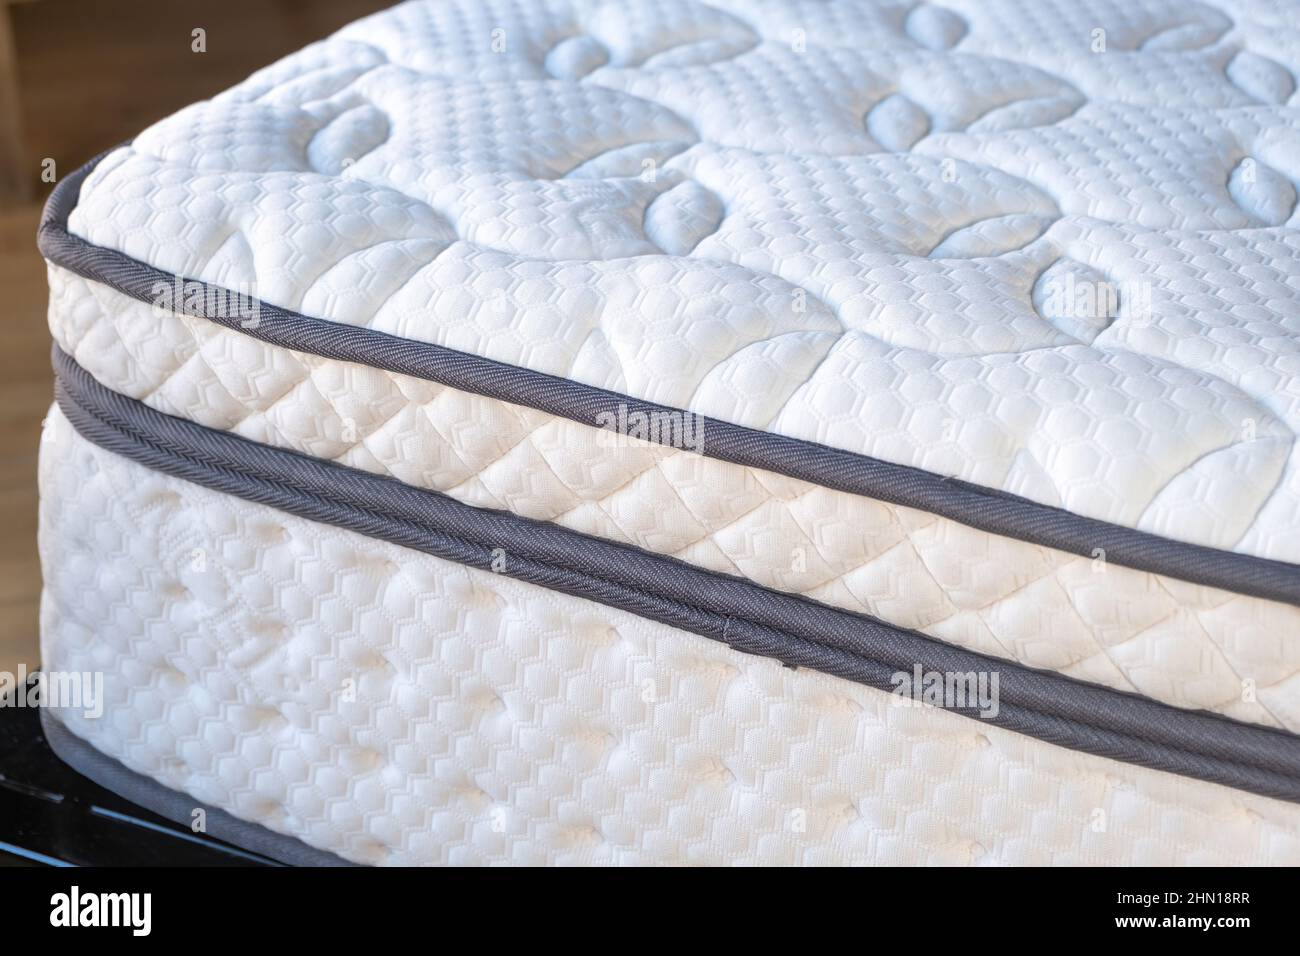 Mattress orthopedic, new and clean on a bed close up view. Home bedroom, hotel room interior detail. Comfort and healthy sleep Stock Photo